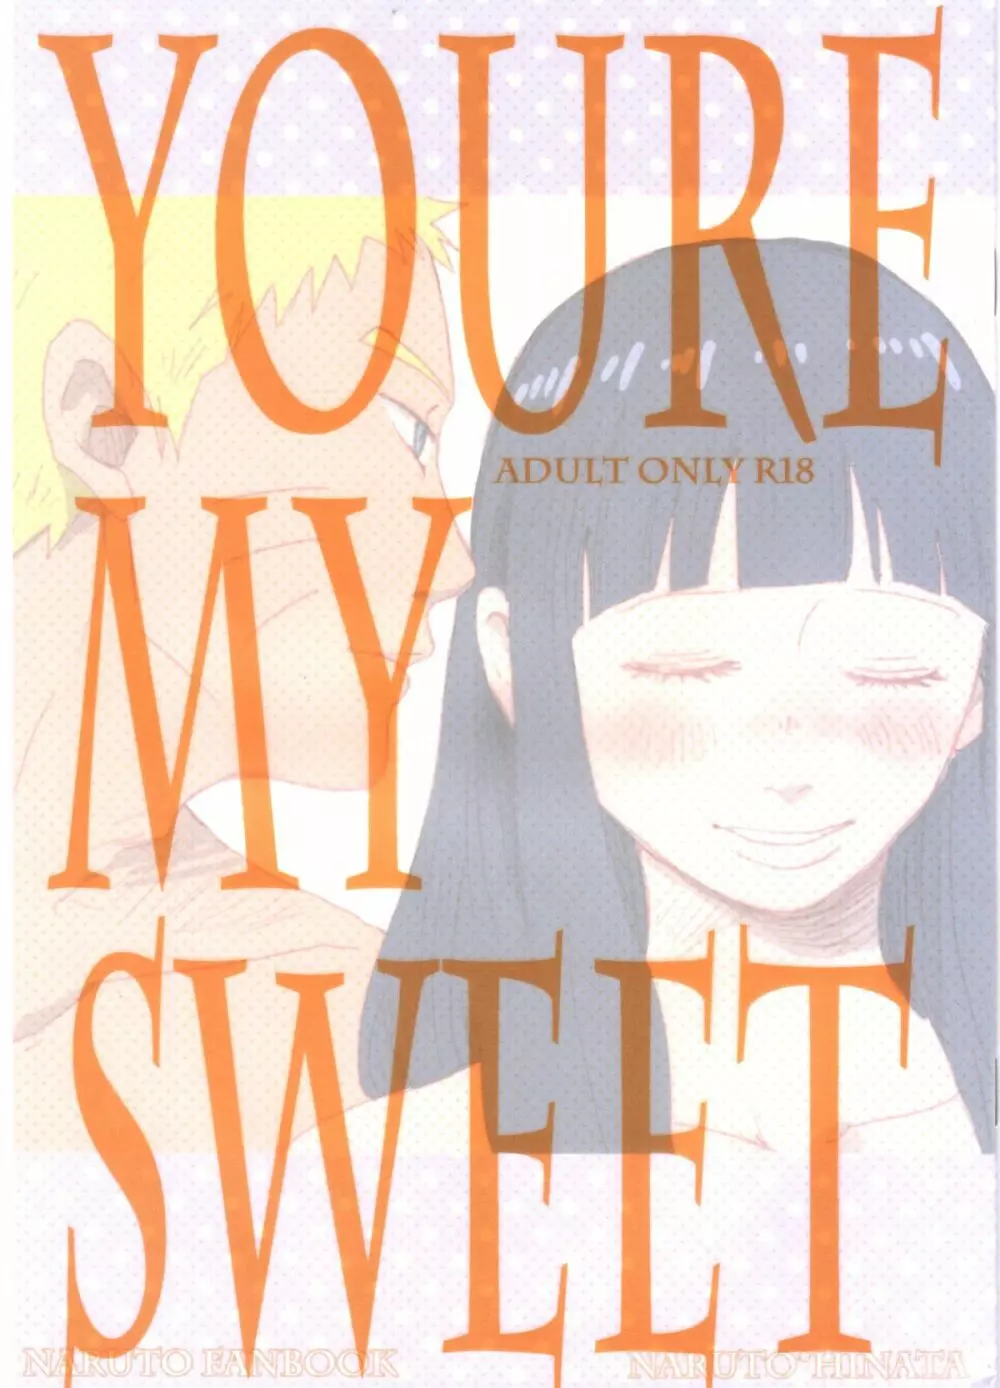 YOUR MY SWEET – I LOVE YOU DARLING